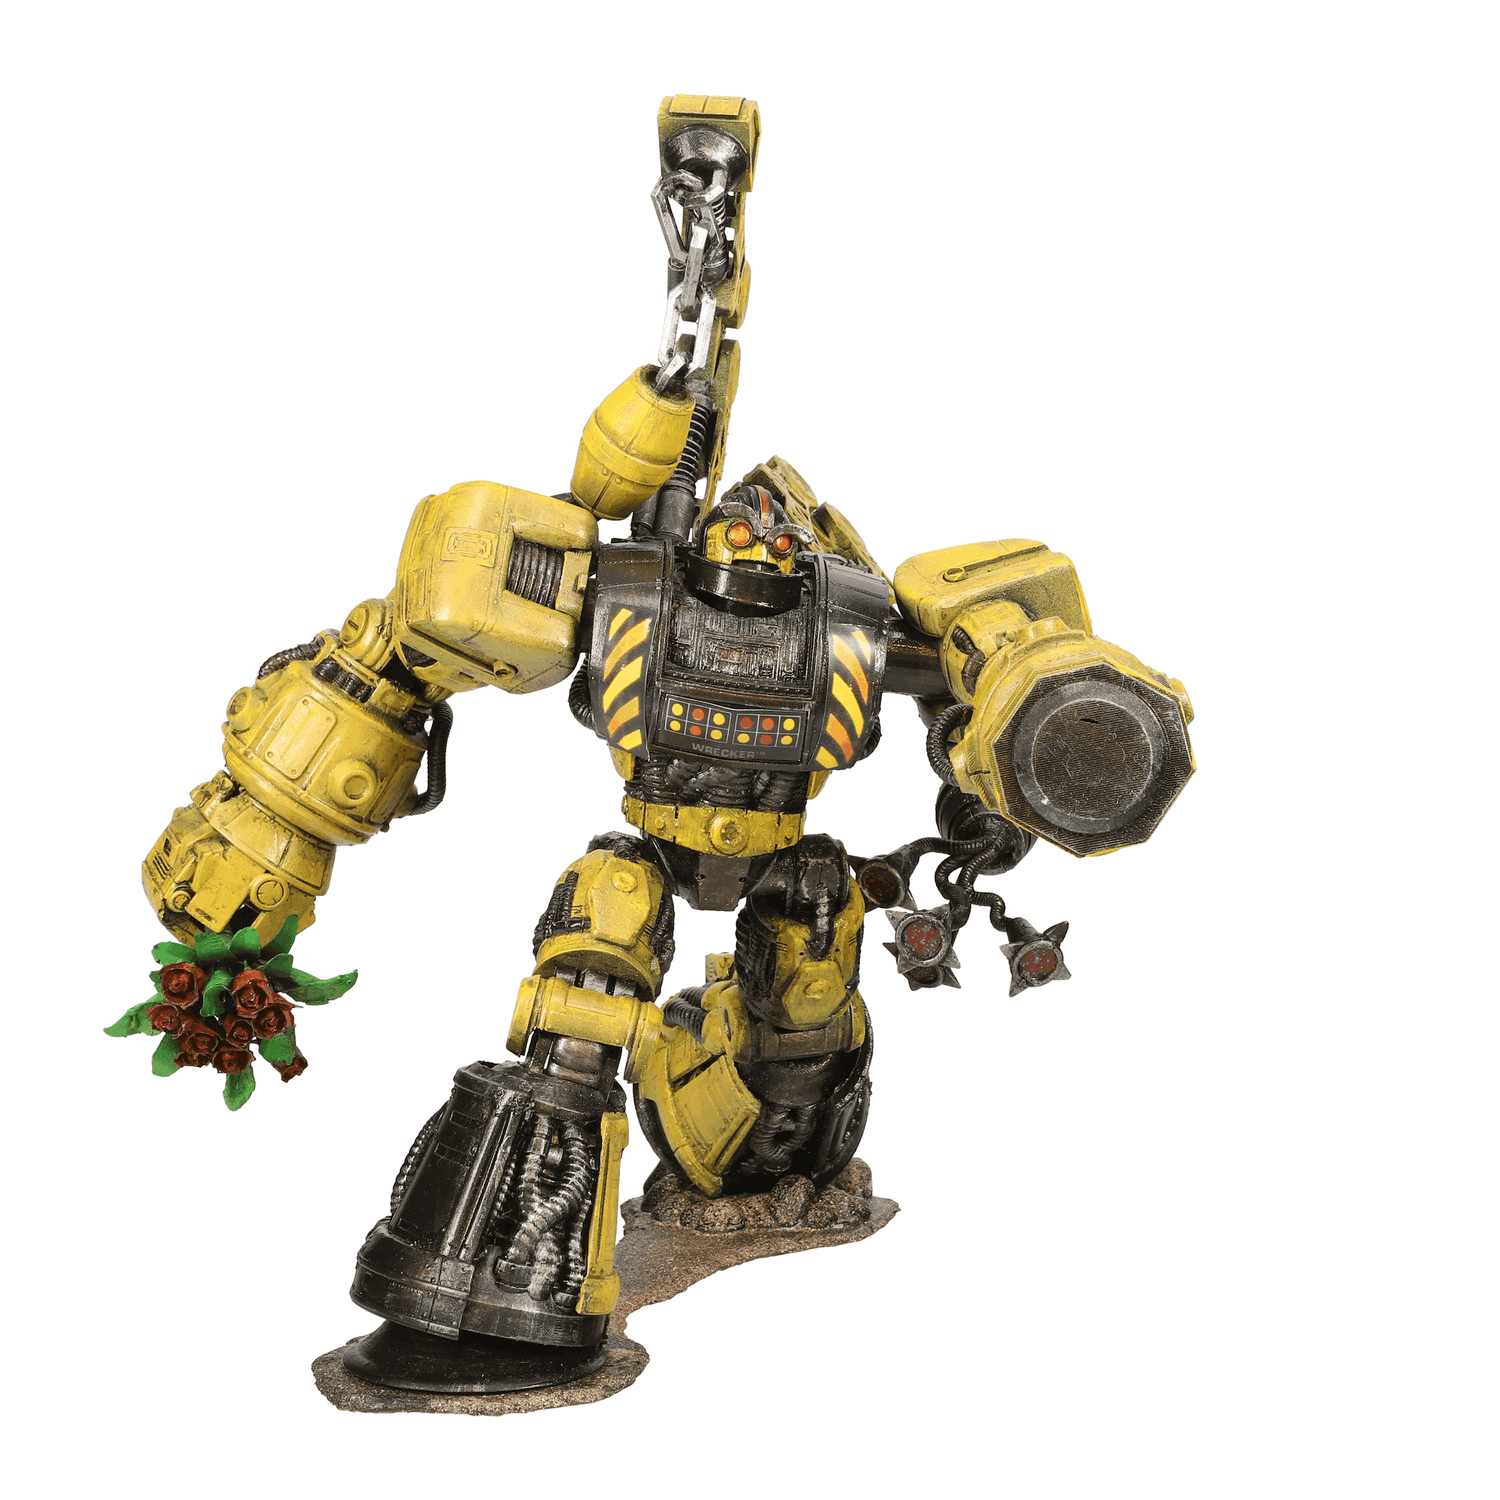 Wrecker collectible figure from Robo Force in artist rotating gif